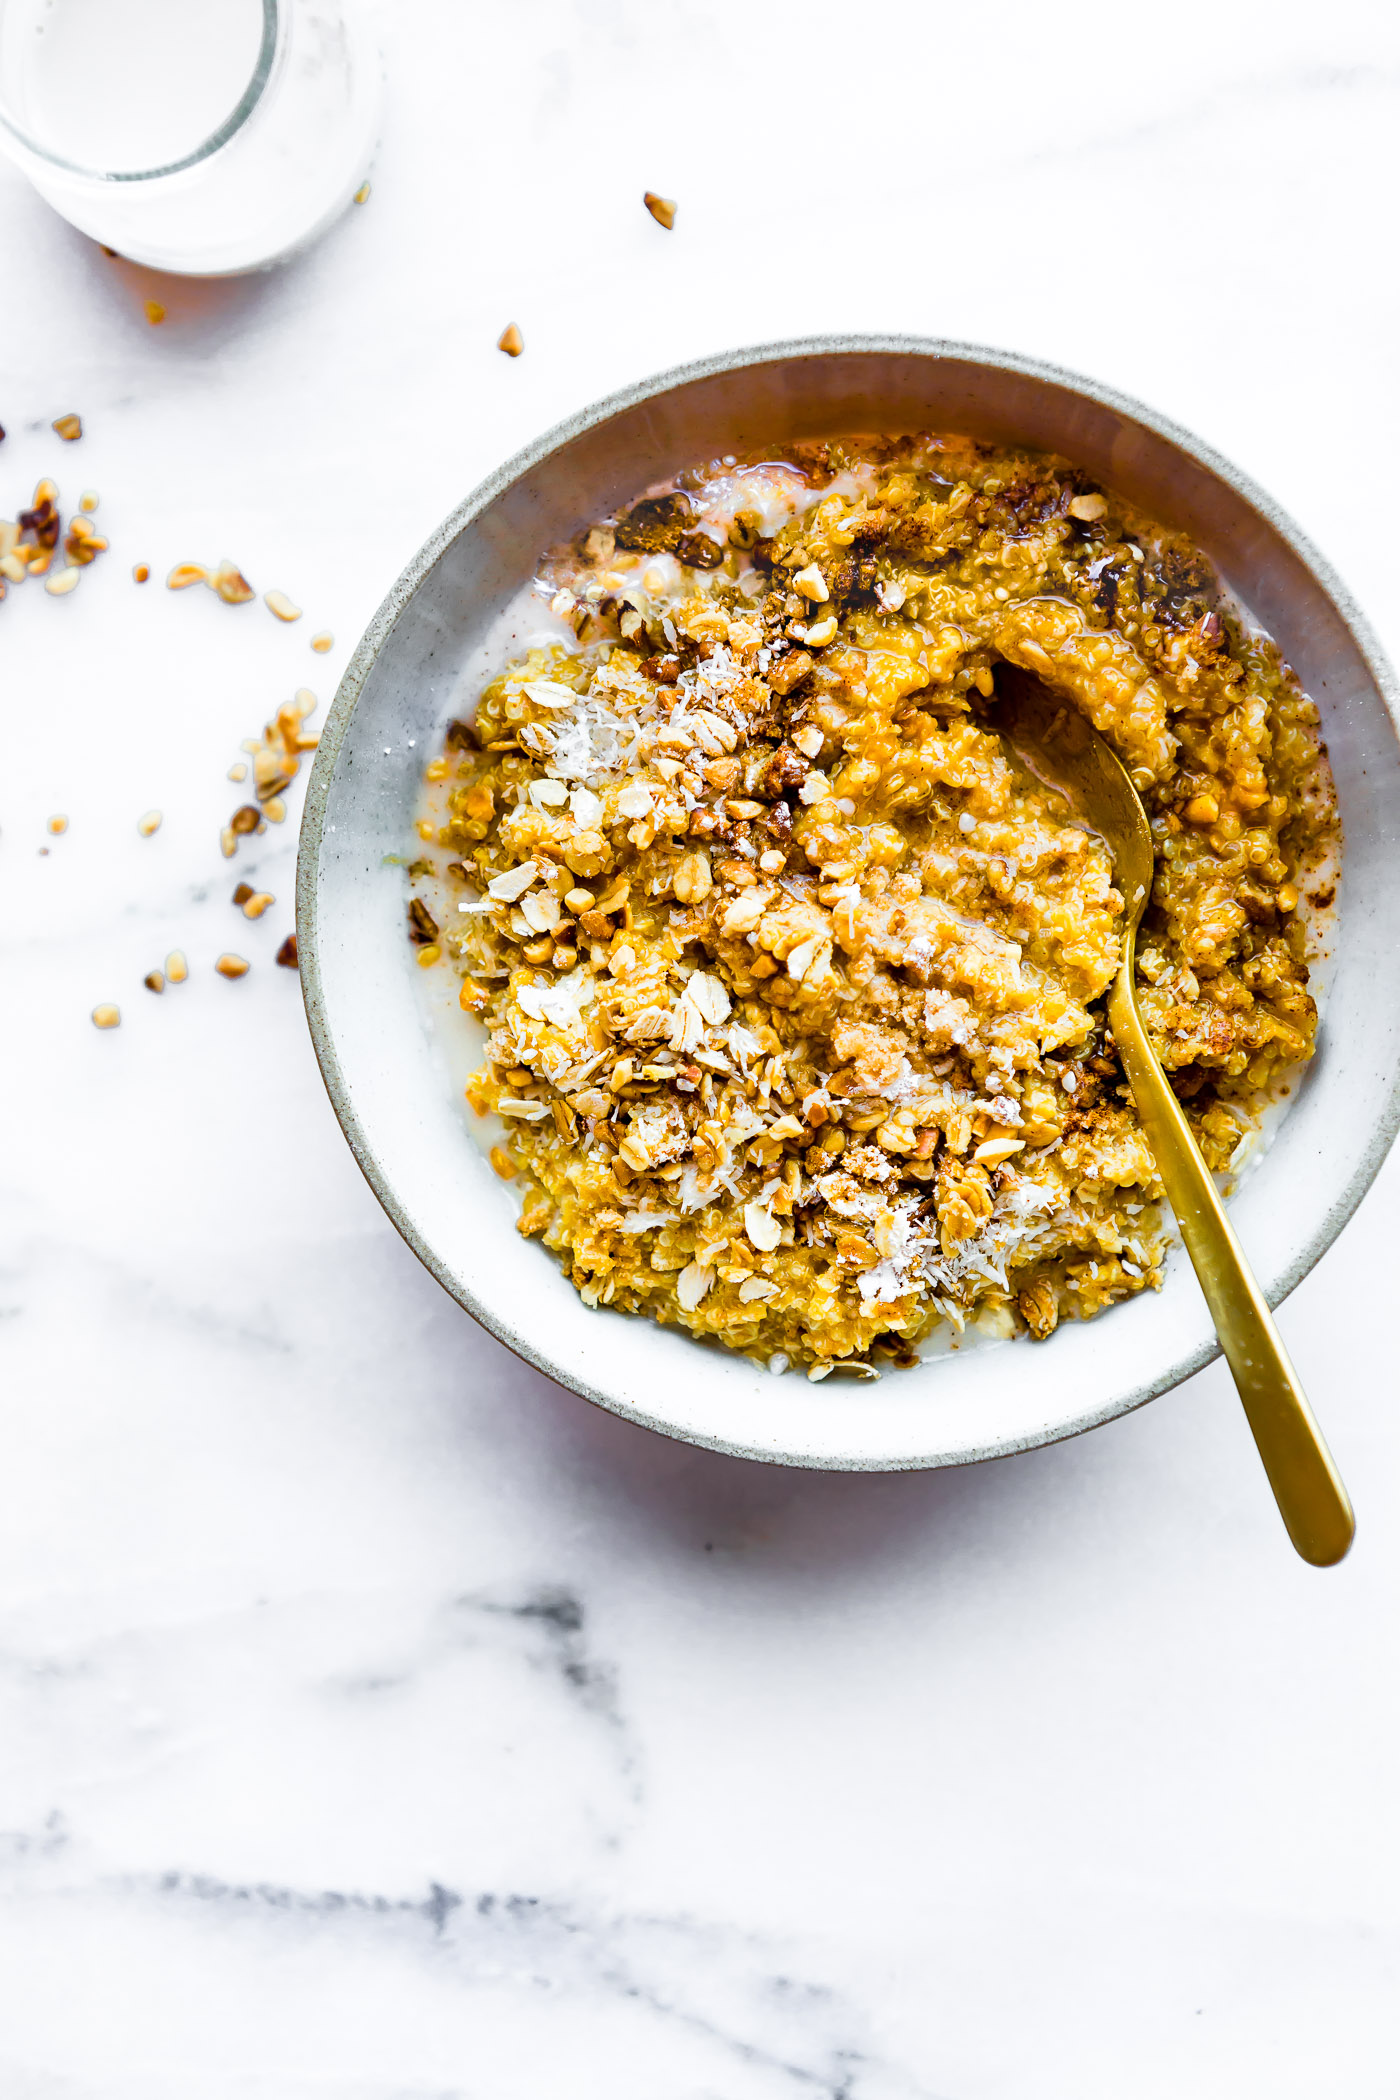 Creamy Pumpkin Quinoa Breakfast. A balanced vegan breakfast with pumpkin, quinoa, coconut milk, maple, & nuts. Easy to cook on stove top or in slow cooker.